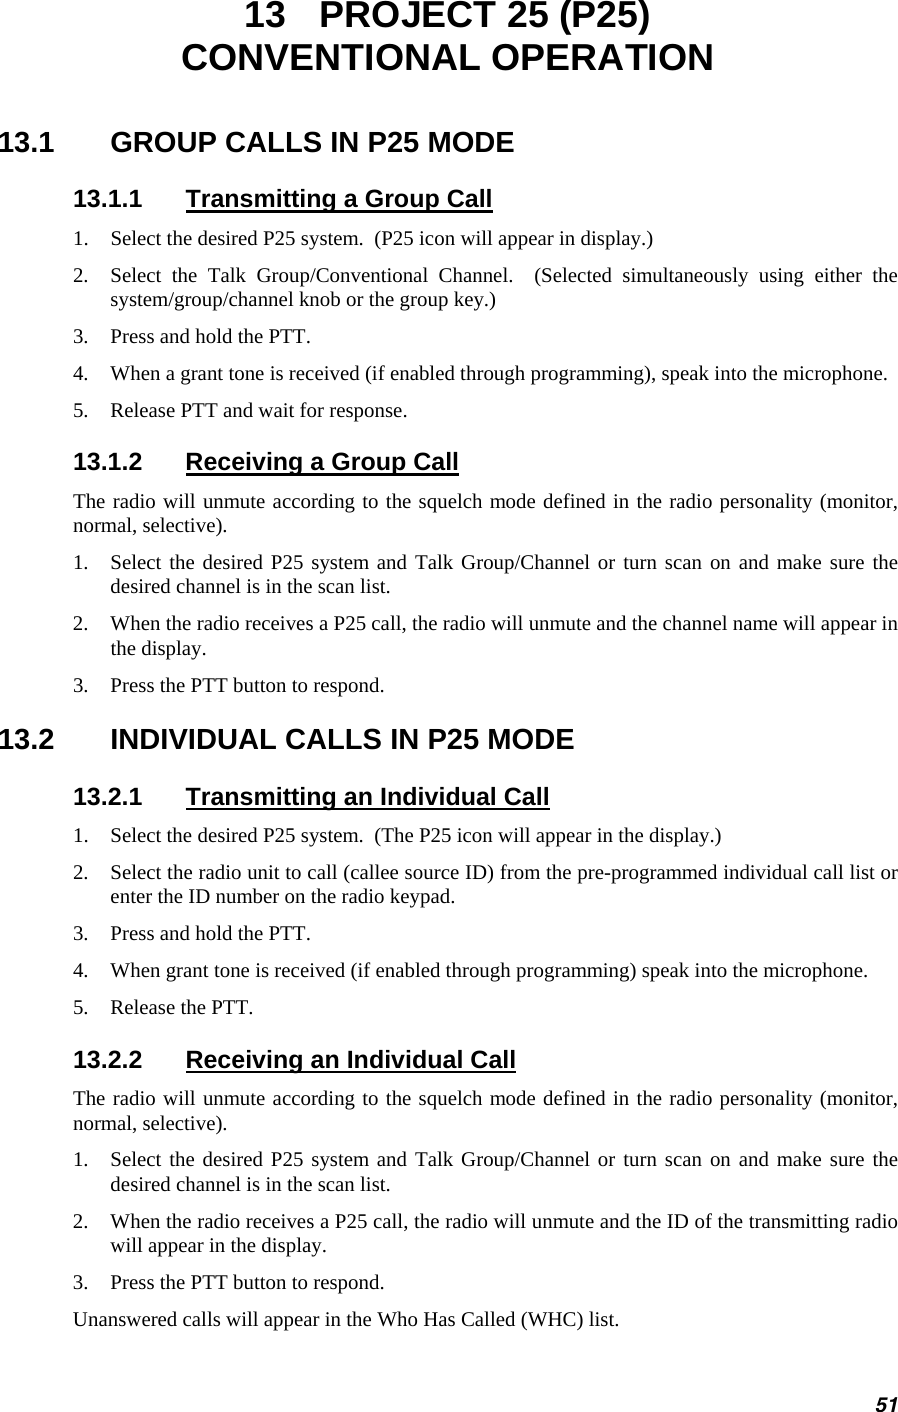 13  PROJECT 25 (P25) CONVENTIONAL OPERATION 13.1  GROUP CALLS IN P25 MODE 13.1.1  Transmitting a Group Call 1.  Select the desired P25 system.  (P25 icon will appear in display.) 2.  Select the Talk Group/Conventional Channel.  (Selected simultaneously using either the system/group/channel knob or the group key.) 3.  Press and hold the PTT. 4.  When a grant tone is received (if enabled through programming), speak into the microphone. 5.  Release PTT and wait for response. 13.1.2  Receiving a Group Call The radio will unmute according to the squelch mode defined in the radio personality (monitor, normal, selective). 1.  Select the desired P25 system and Talk Group/Channel or turn scan on and make sure the desired channel is in the scan list. 2.  When the radio receives a P25 call, the radio will unmute and the channel name will appear in the display. 3.  Press the PTT button to respond. 13.2  INDIVIDUAL CALLS IN P25 MODE 13.2.1  Transmitting an Individual Call 1.  Select the desired P25 system.  (The P25 icon will appear in the display.) 2.  Select the radio unit to call (callee source ID) from the pre-programmed individual call list or enter the ID number on the radio keypad. 3.  Press and hold the PTT. 4.  When grant tone is received (if enabled through programming) speak into the microphone. 5.  Release the PTT. 13.2.2  Receiving an Individual Call The radio will unmute according to the squelch mode defined in the radio personality (monitor, normal, selective). 1.  Select the desired P25 system and Talk Group/Channel or turn scan on and make sure the desired channel is in the scan list. 2.  When the radio receives a P25 call, the radio will unmute and the ID of the transmitting radio will appear in the display. 3.  Press the PTT button to respond. Unanswered calls will appear in the Who Has Called (WHC) list. 51 